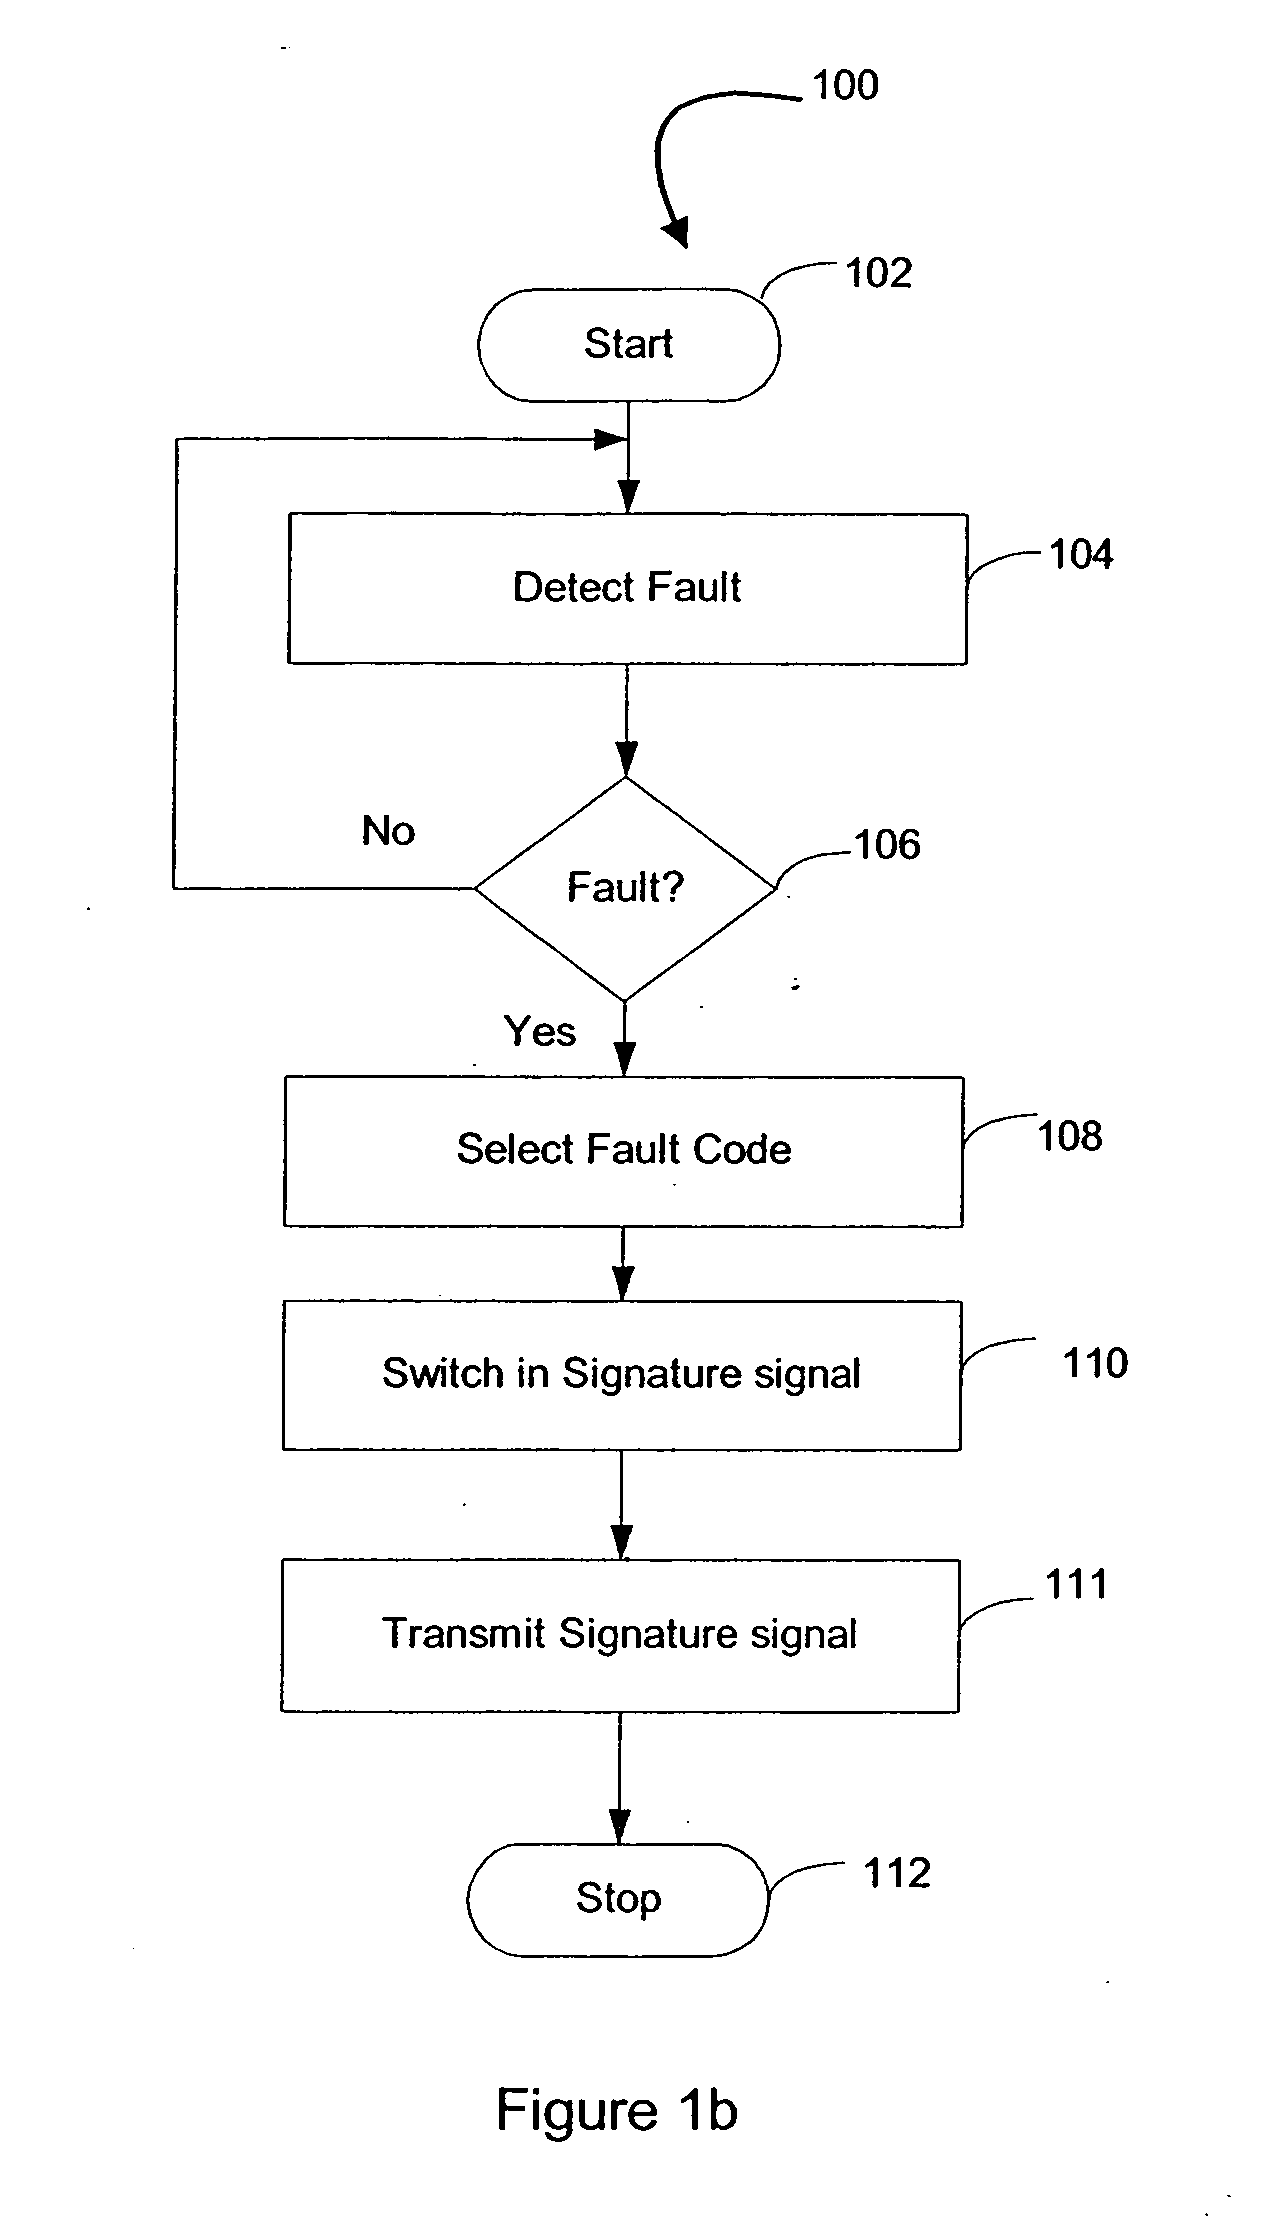 Method and system for providing a signature signal in an optical network in the event of loss of a client